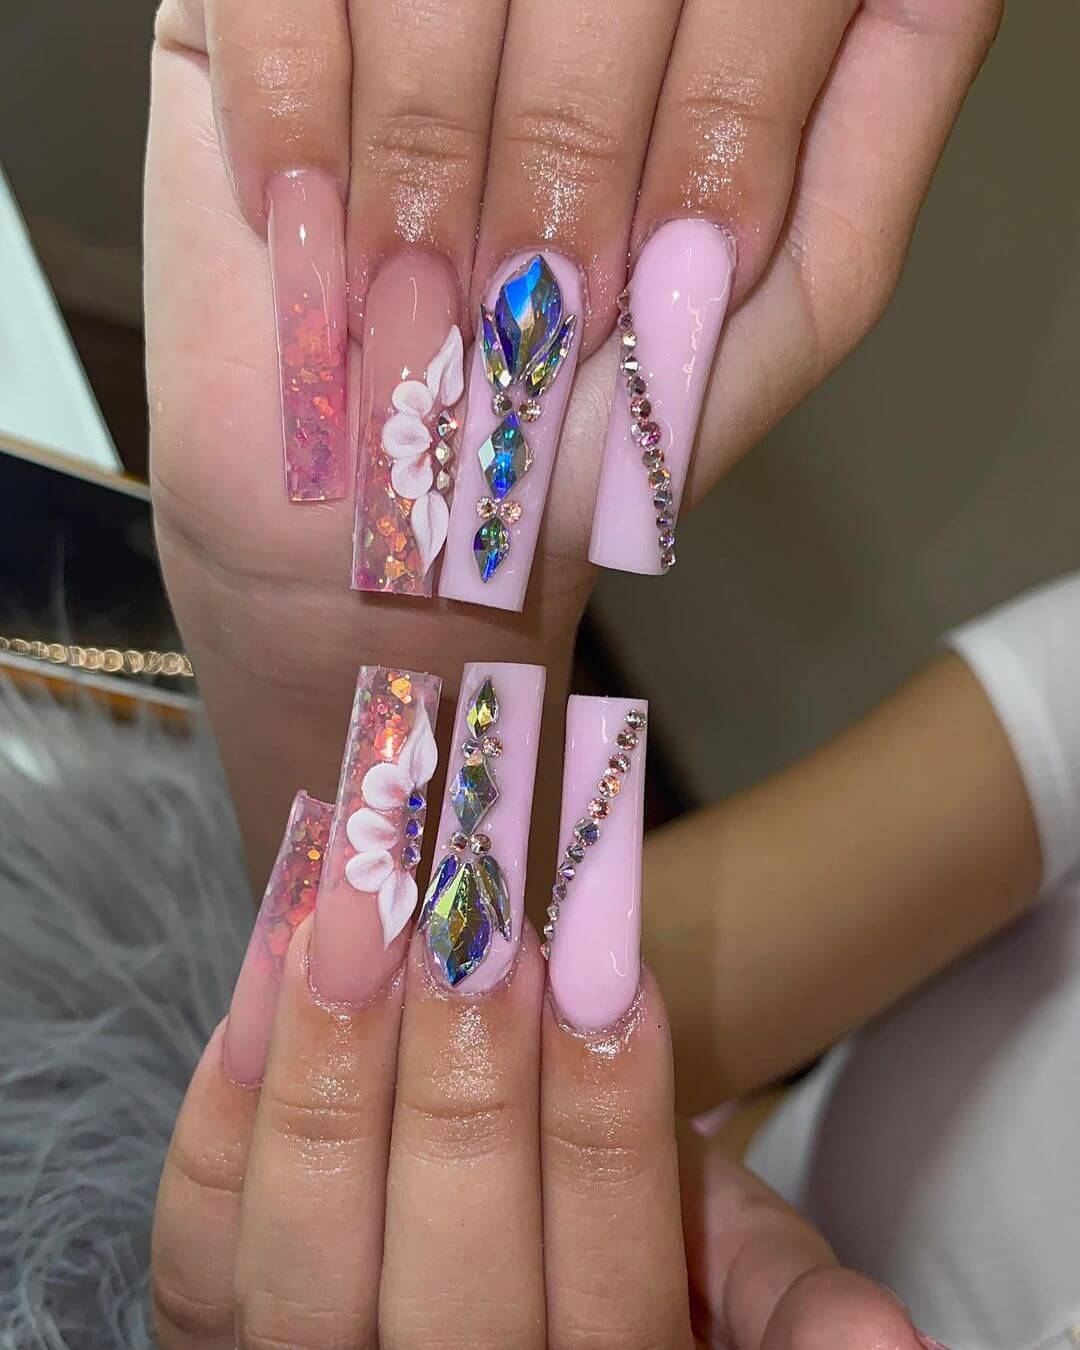 Crystal Nail Art Designs crystal nail art and floral designs are wow!